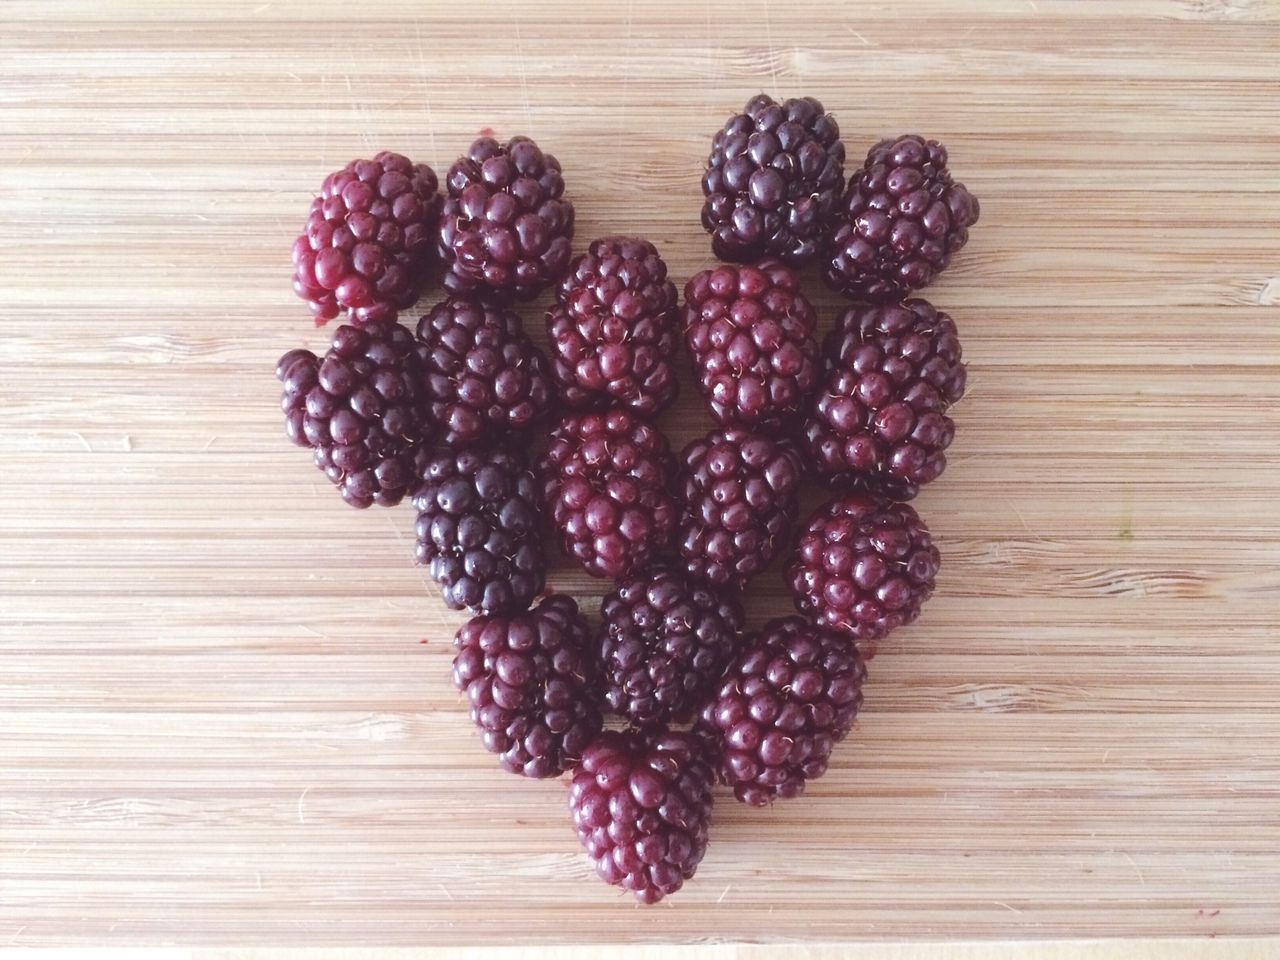 Directly above shot of black berries arranged in heart shape on table